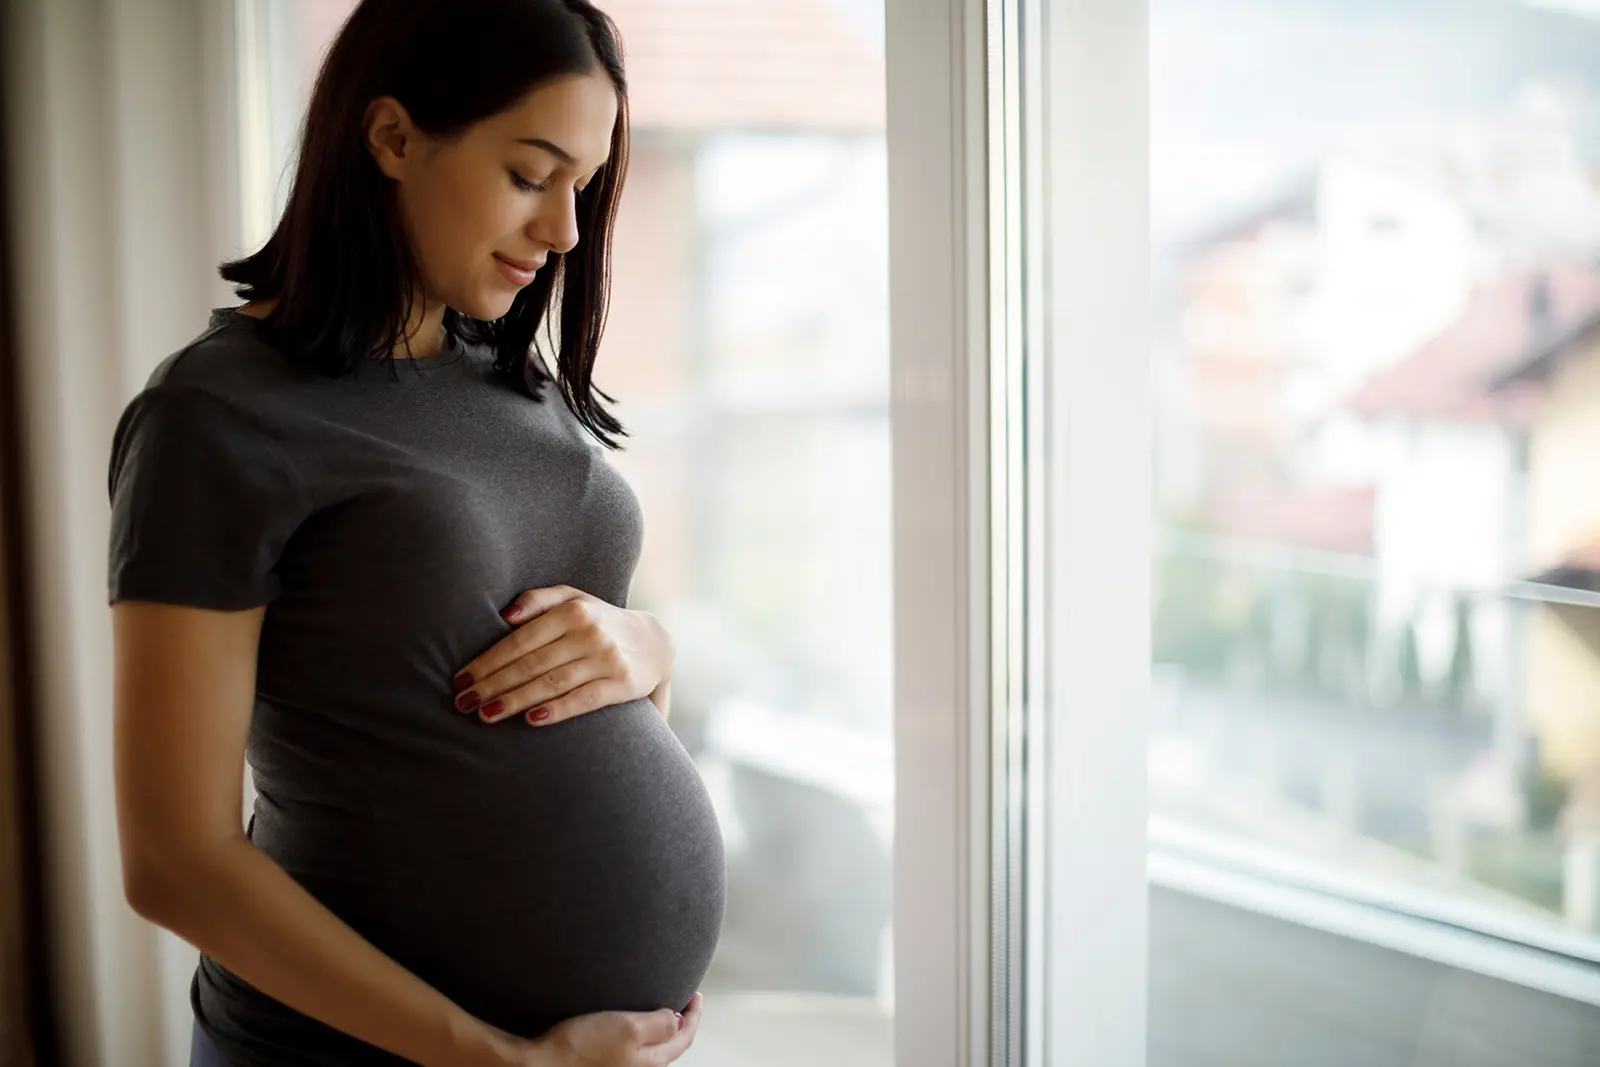 Pregnant woman staring lovingly at baby bump she is holding